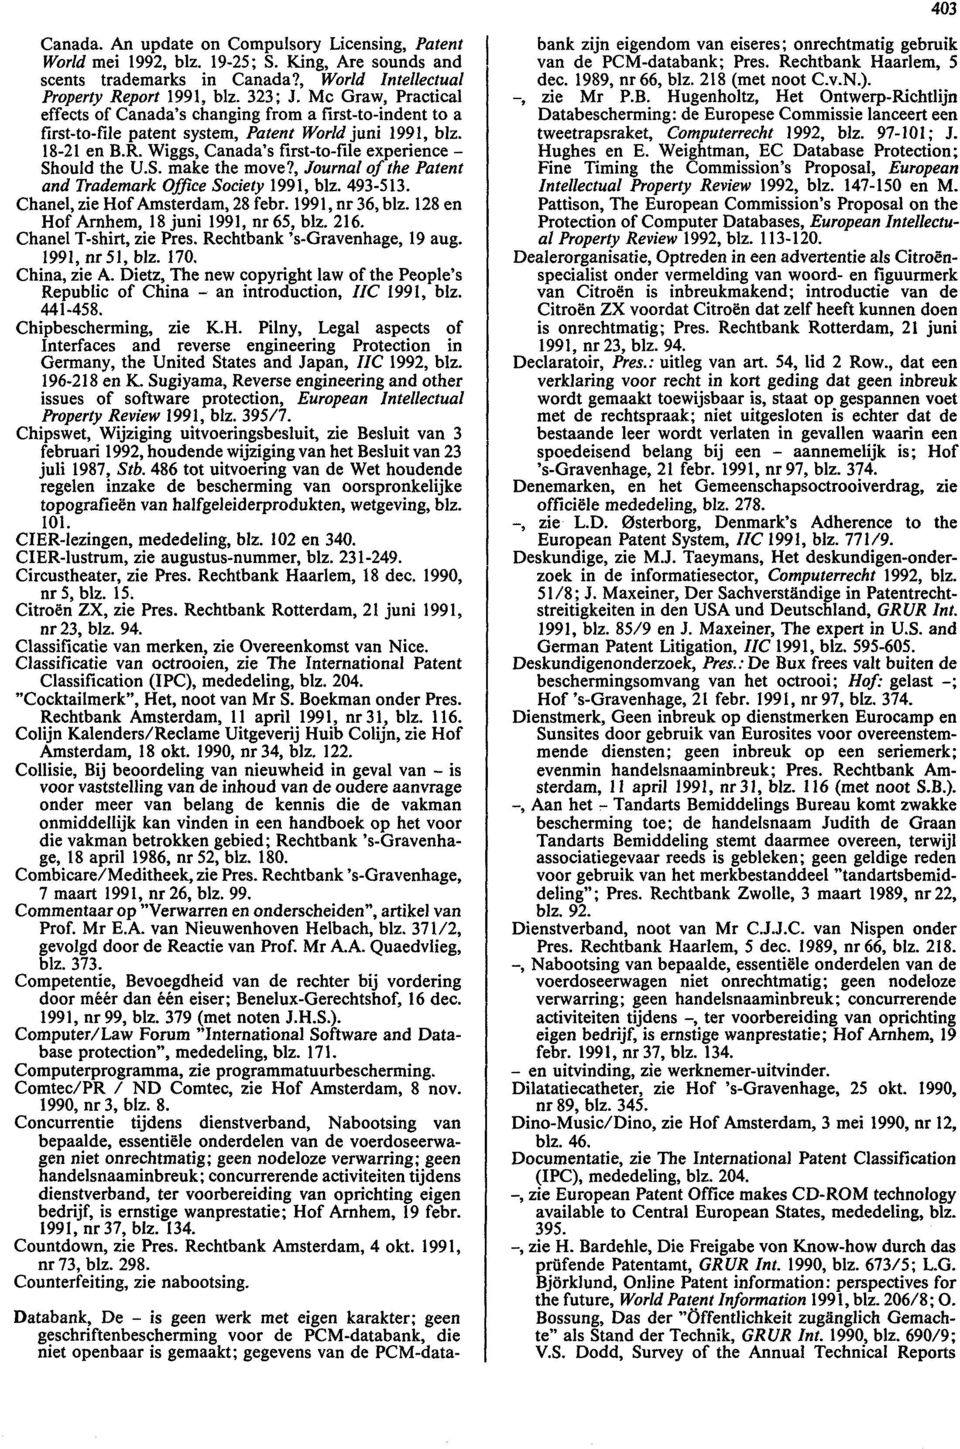 Wiggs, Canada's first-to-file experience - Should the U.S. make the move?, Journal of the Patent and Trademark Office Society 1991, blz. 493-513. Chanel, zie Hof Amsterdam, 28 febr. 1991, nr 36, blz.